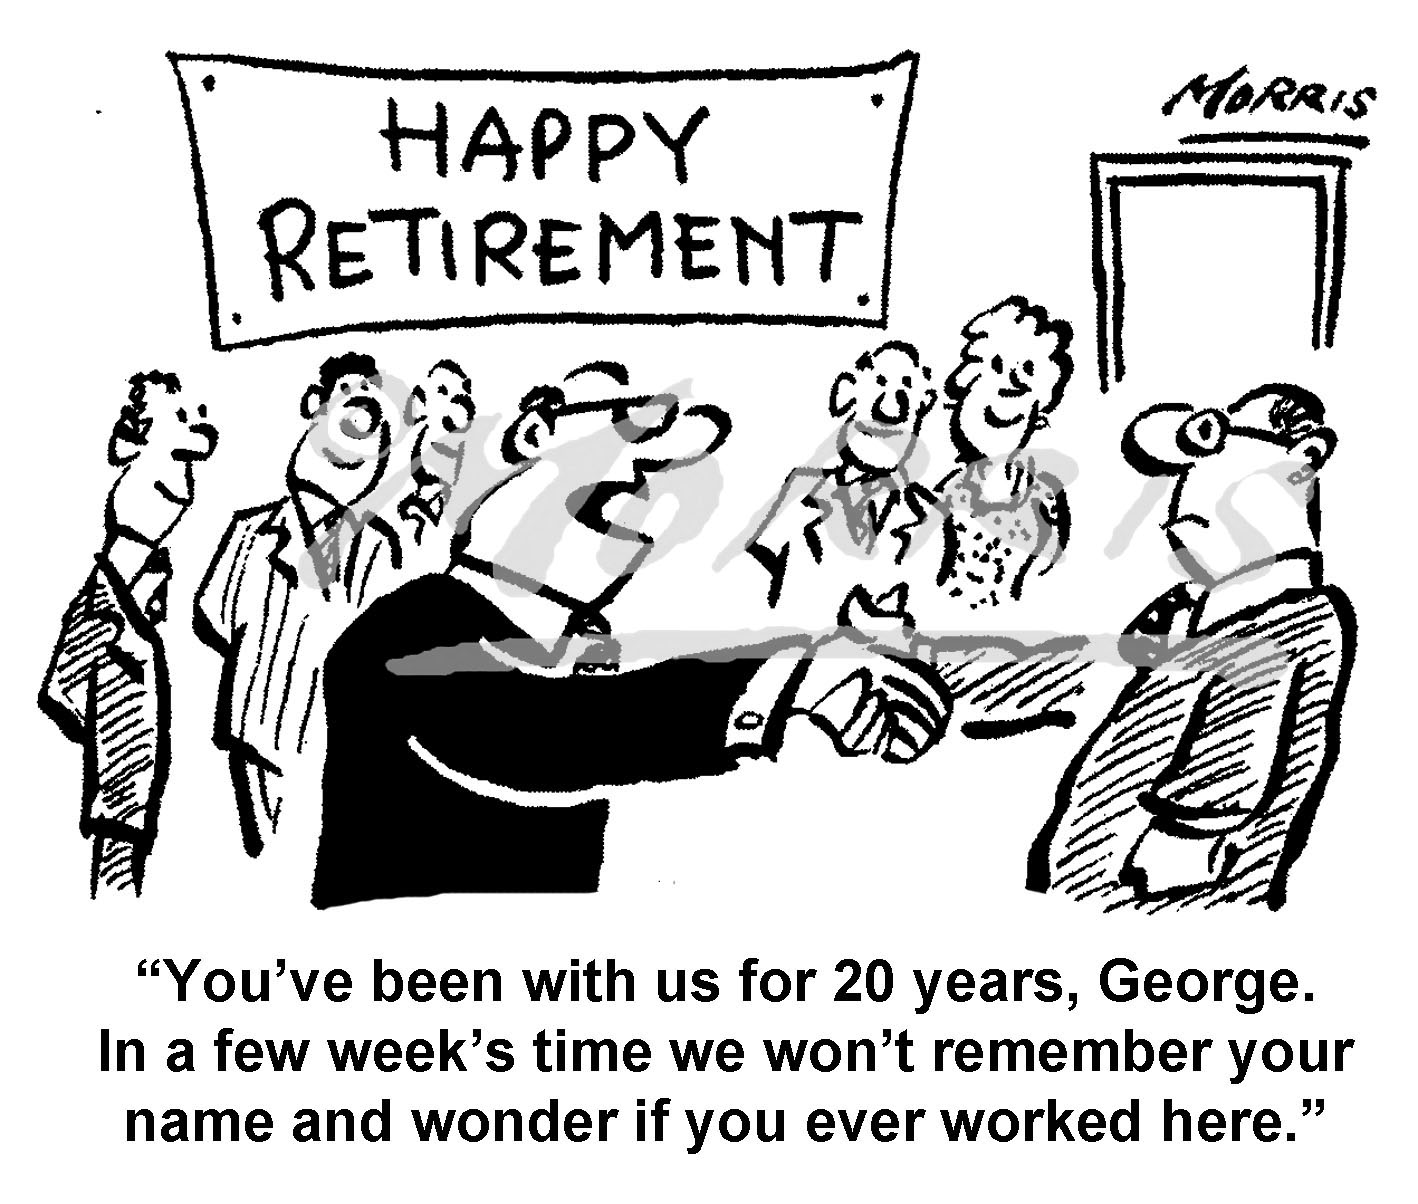 Free Retirement Cartoon Images Download Free Retirement Cartoon Images ...